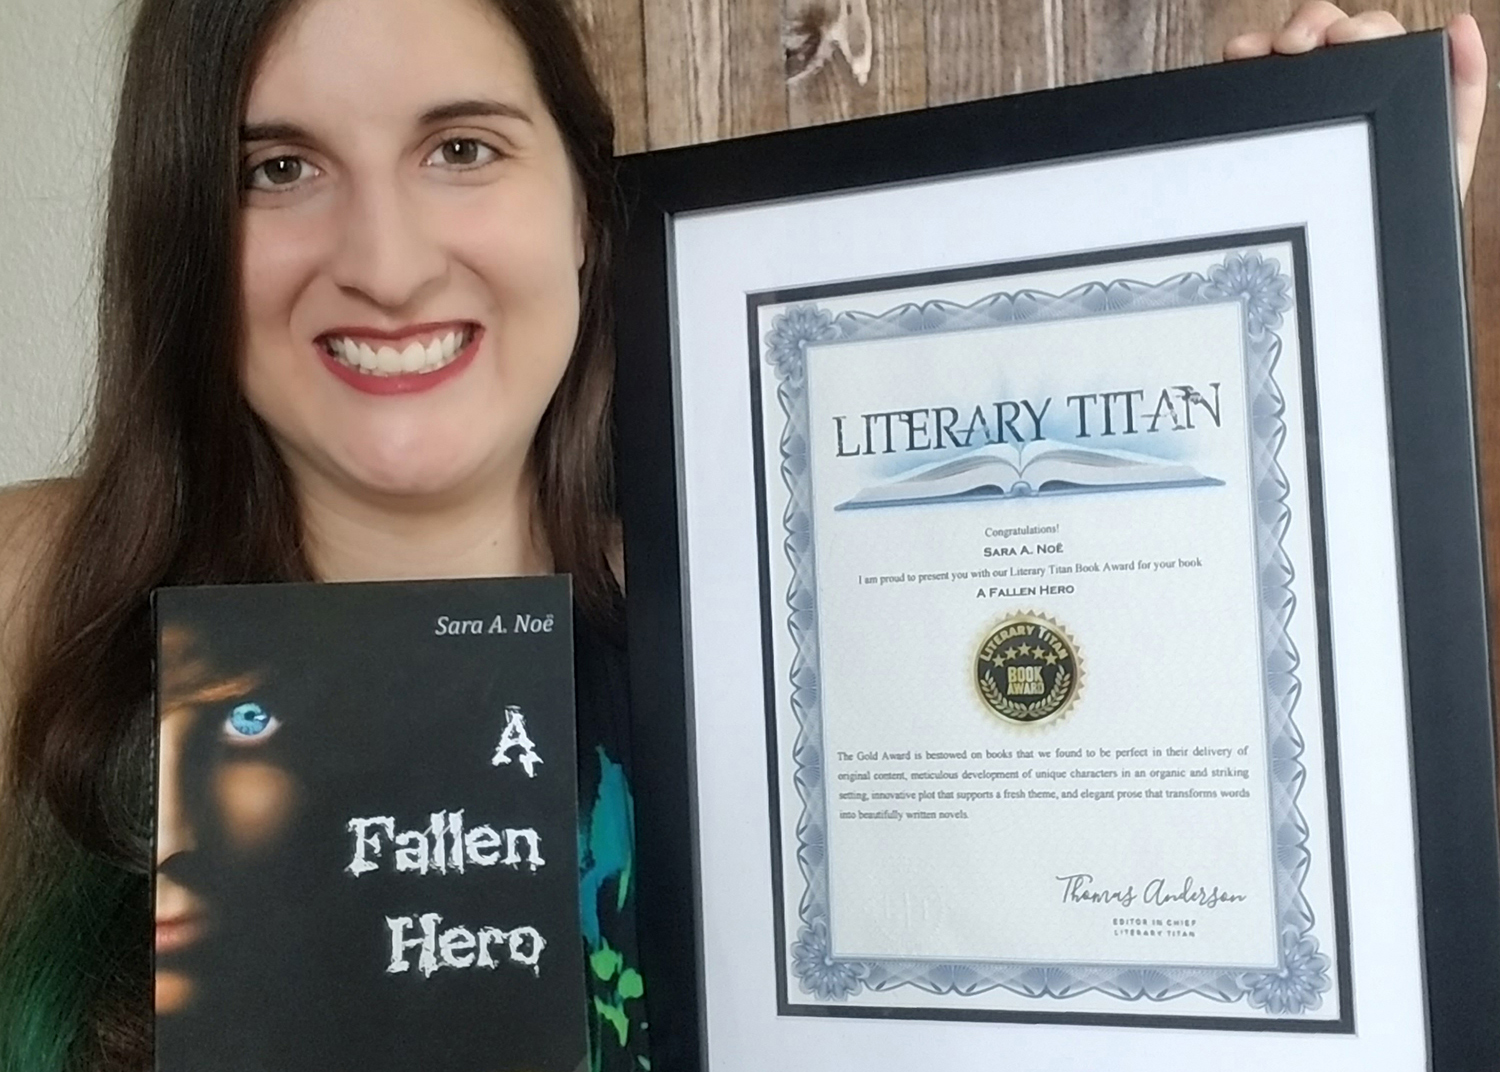 Author Sara A. Noe with the Literary Titan Gold Book Award certificate